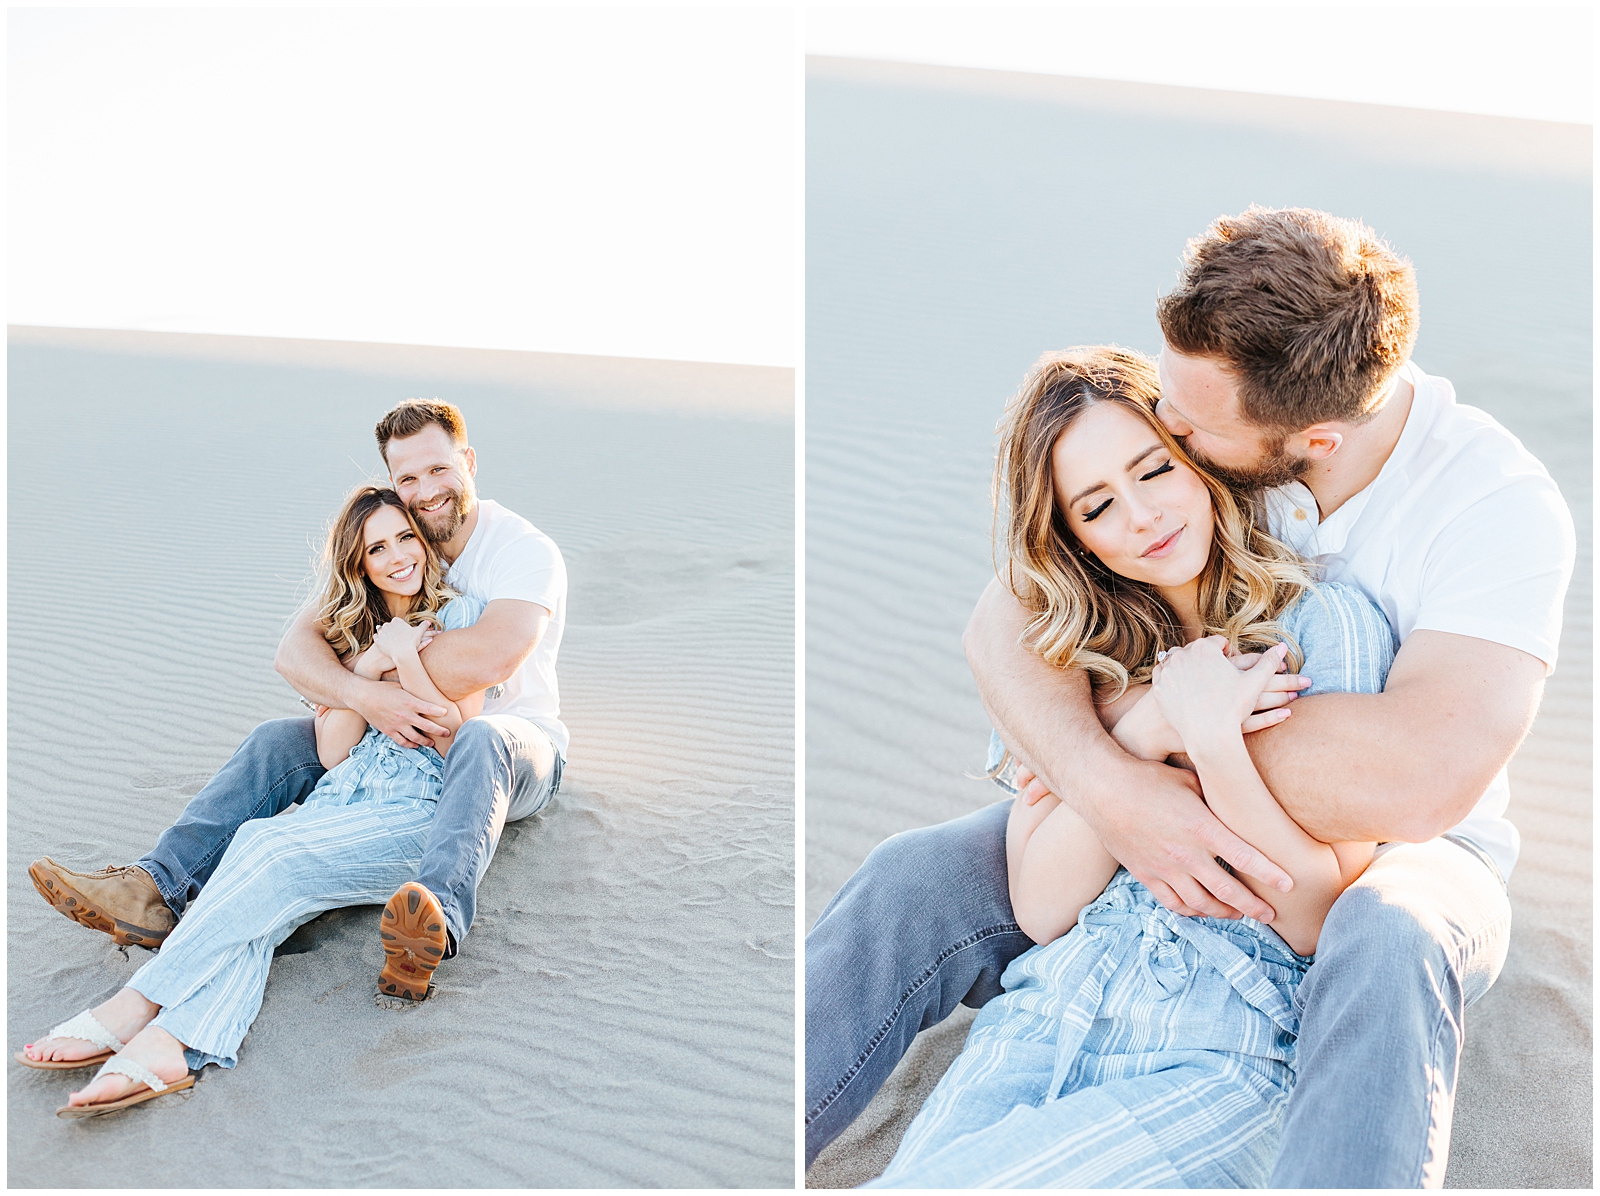 Joyful Romantic Light and Airy Engagement Session at the Sand Dunes